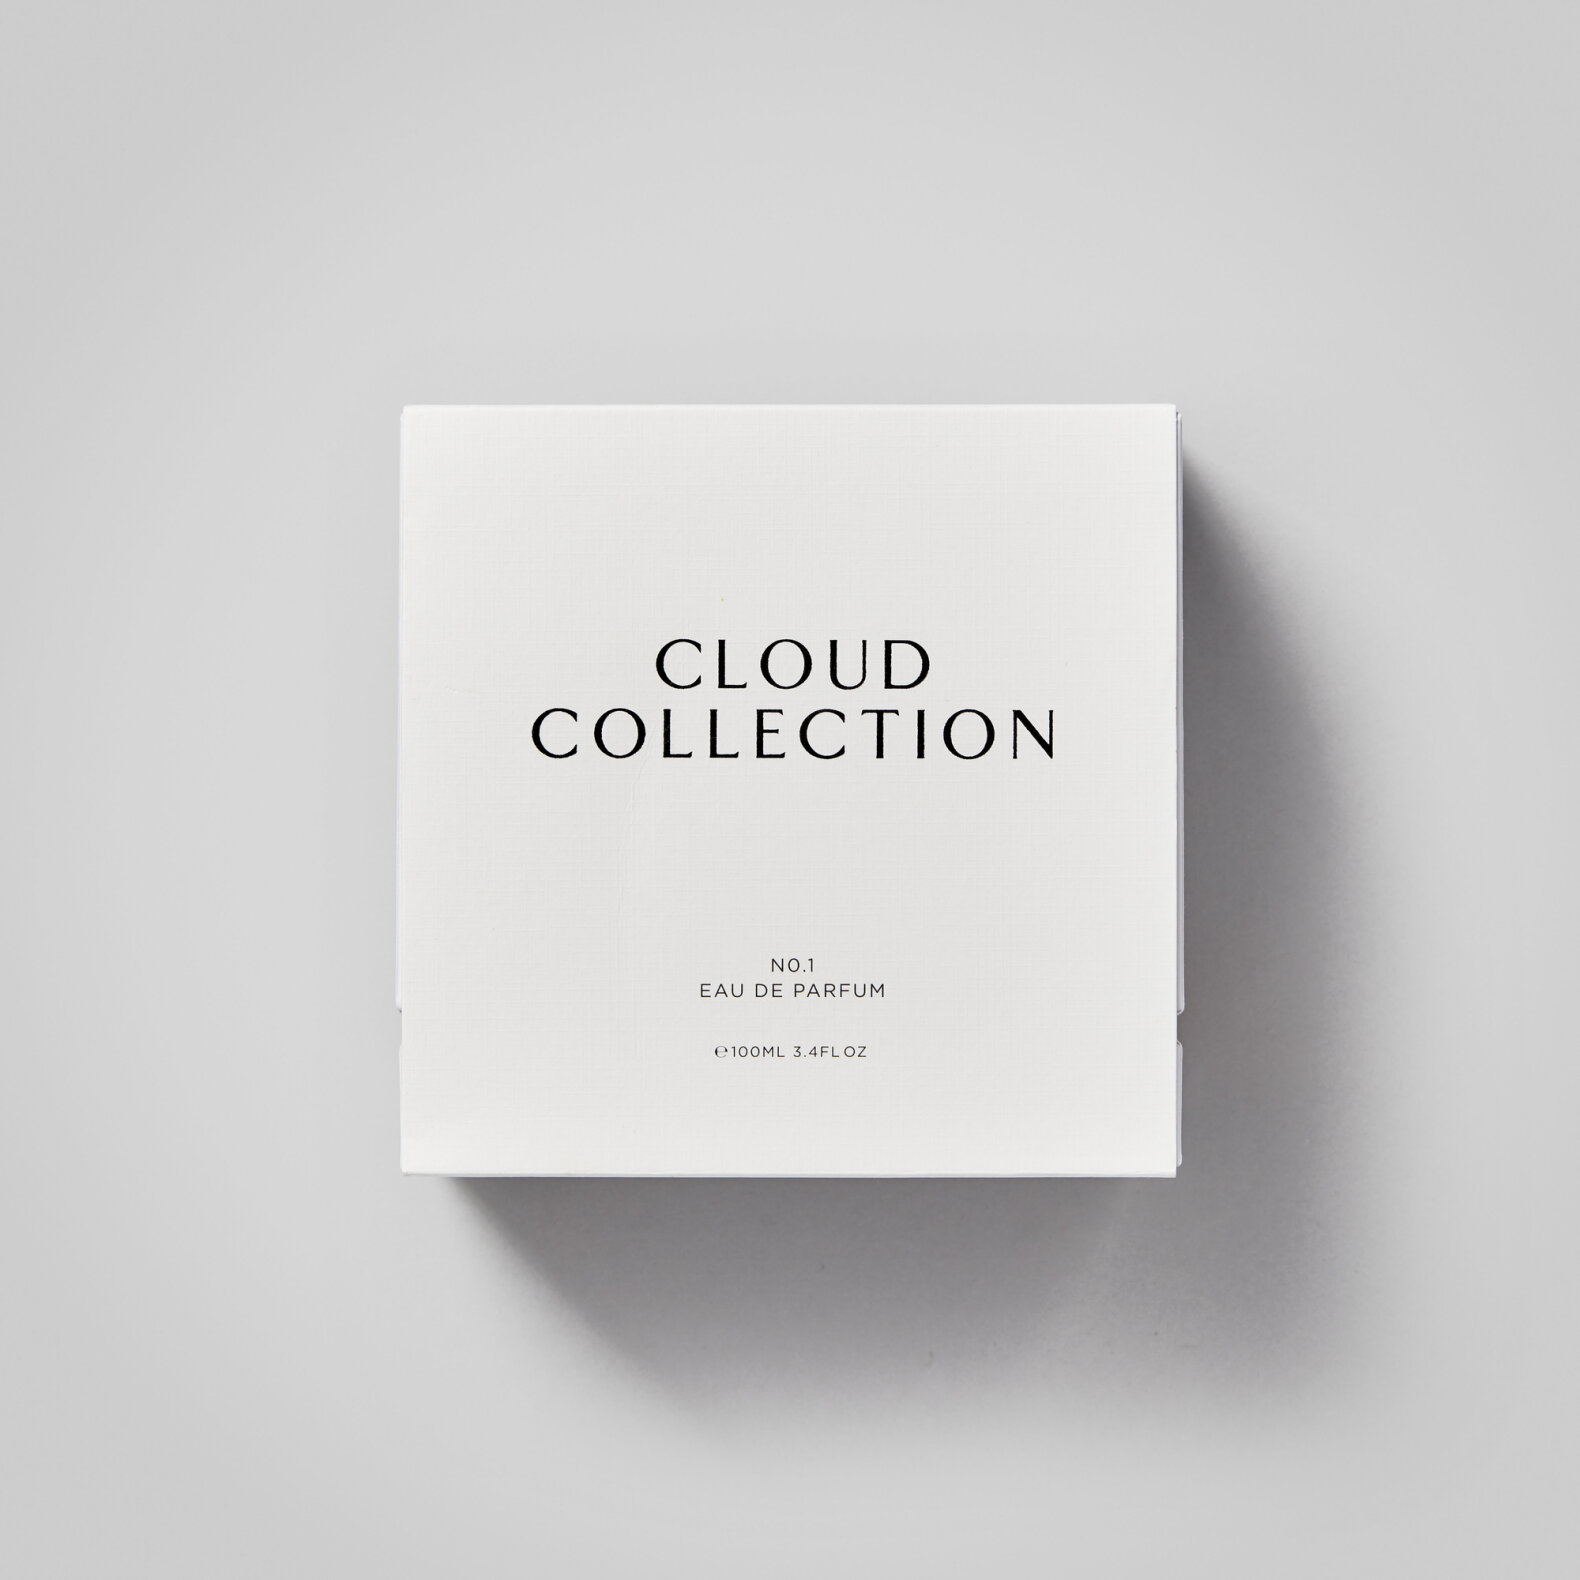 CLOUD COLLECTION No.1 — Official webshop for ZARKOPERFUME